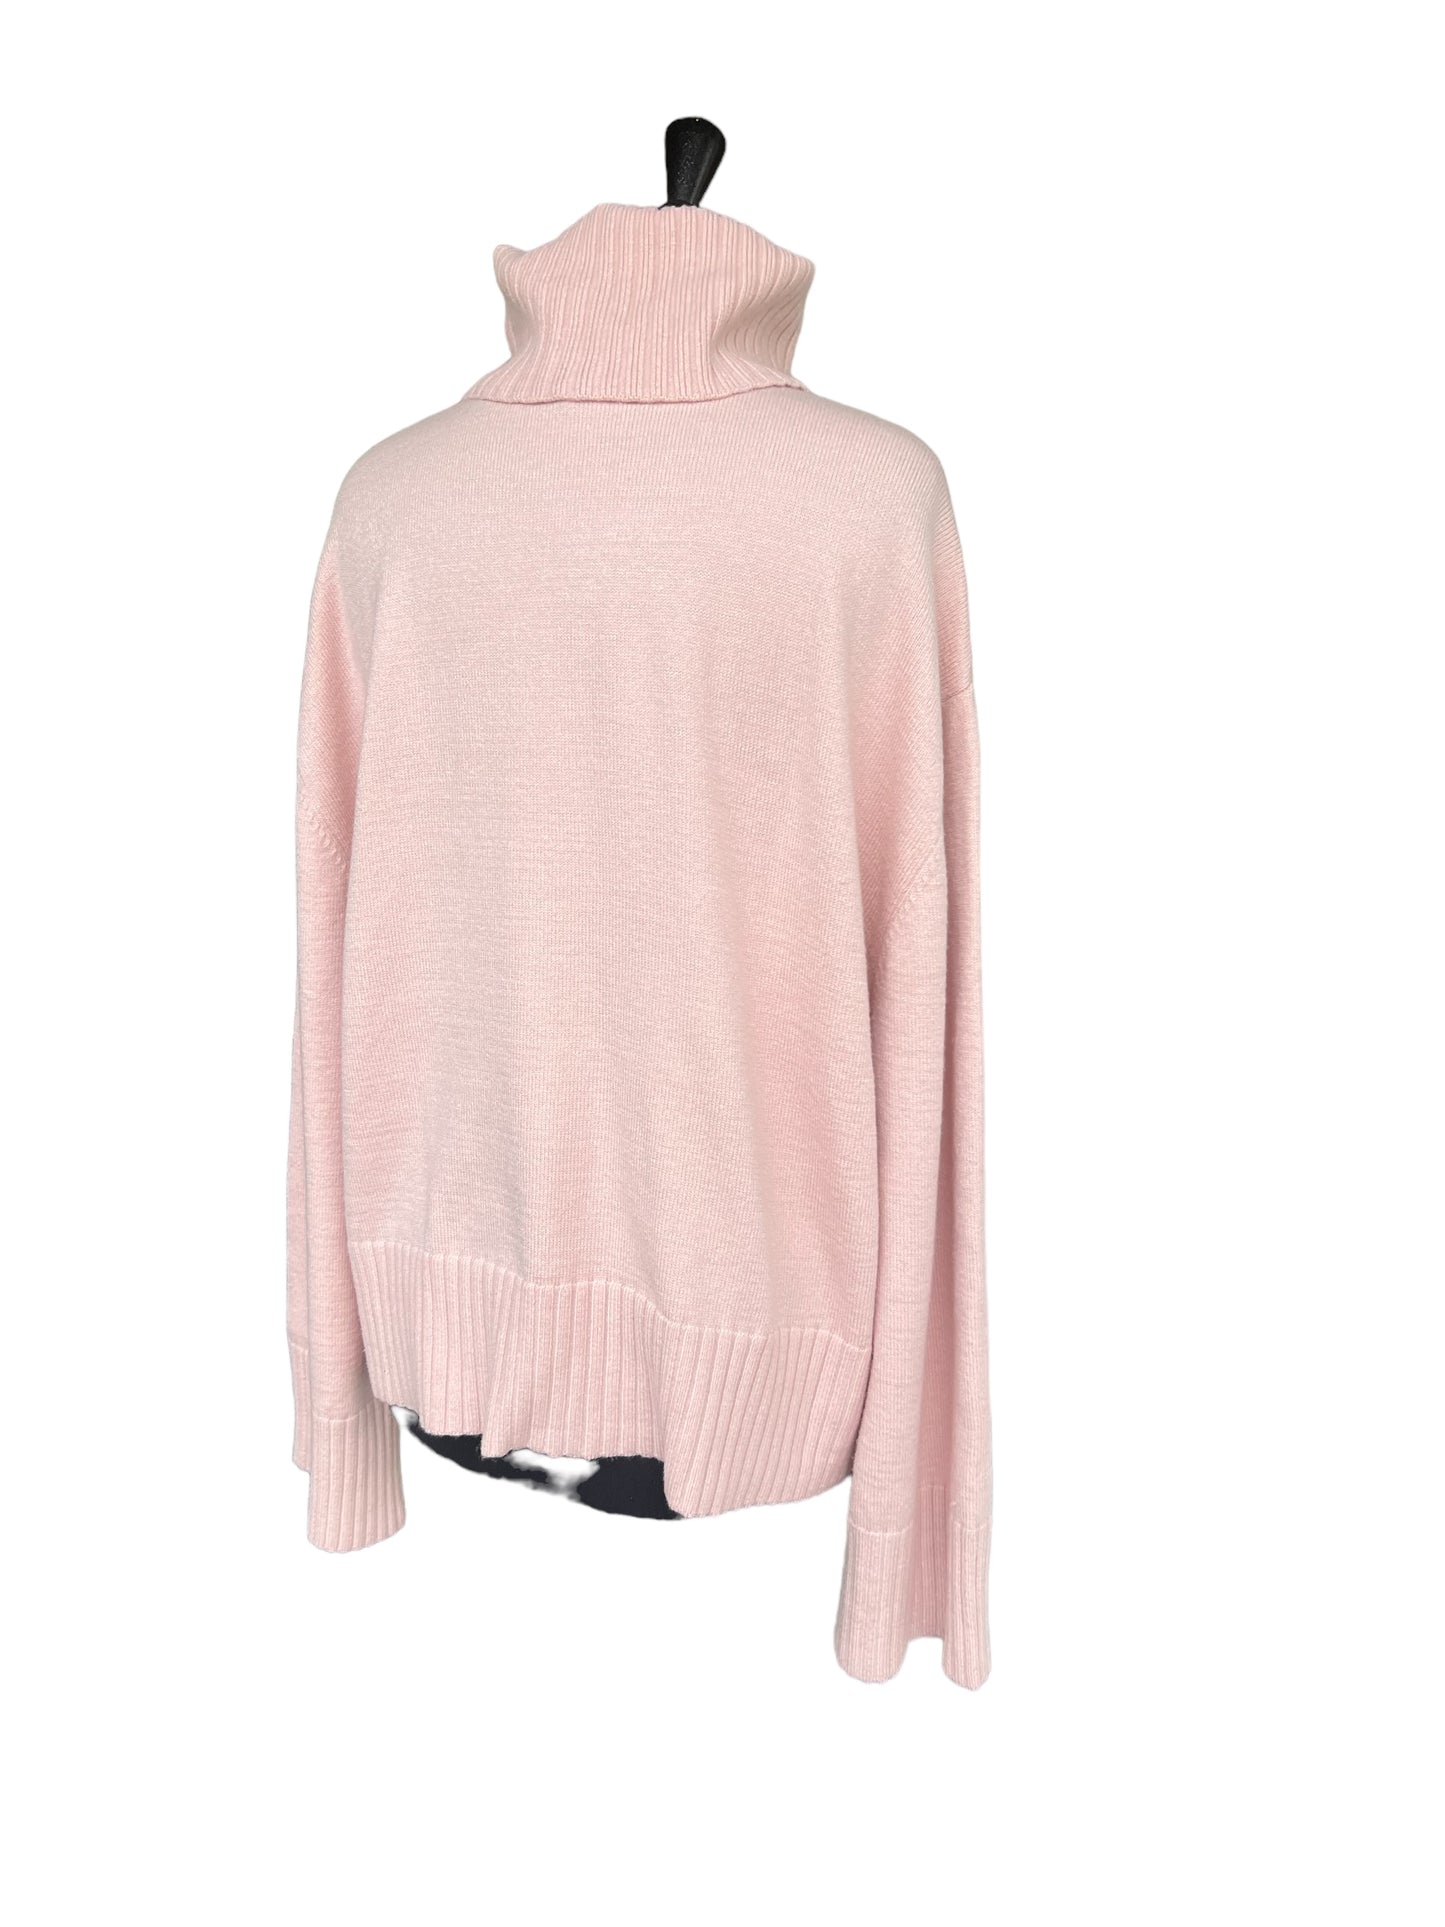 Laundry Pink Sweater